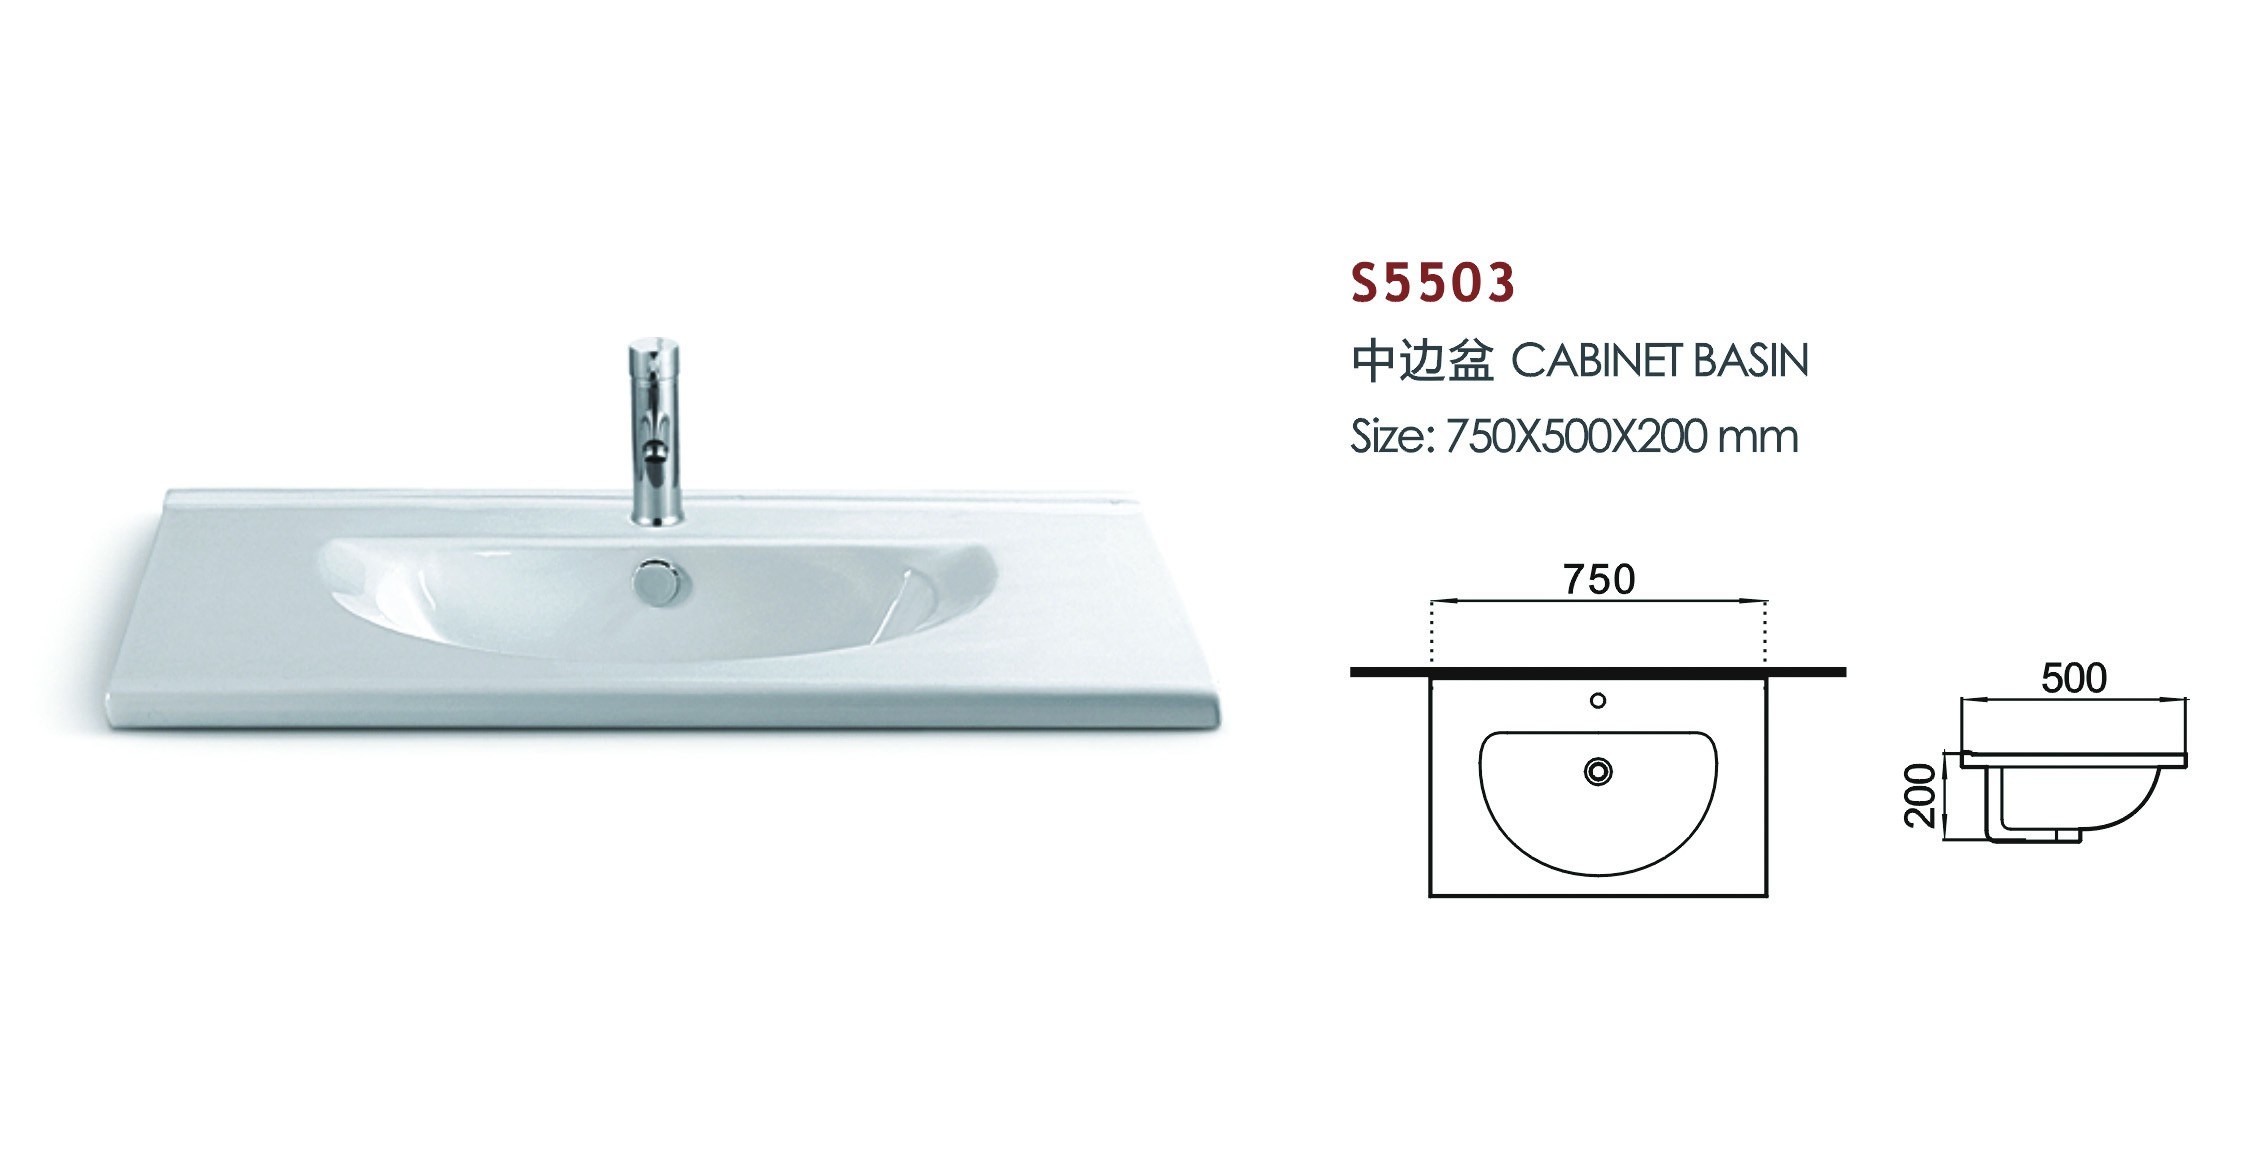 Snow White Sanitary Ware Kitchen Sink for Washing Vegetable (S5503)